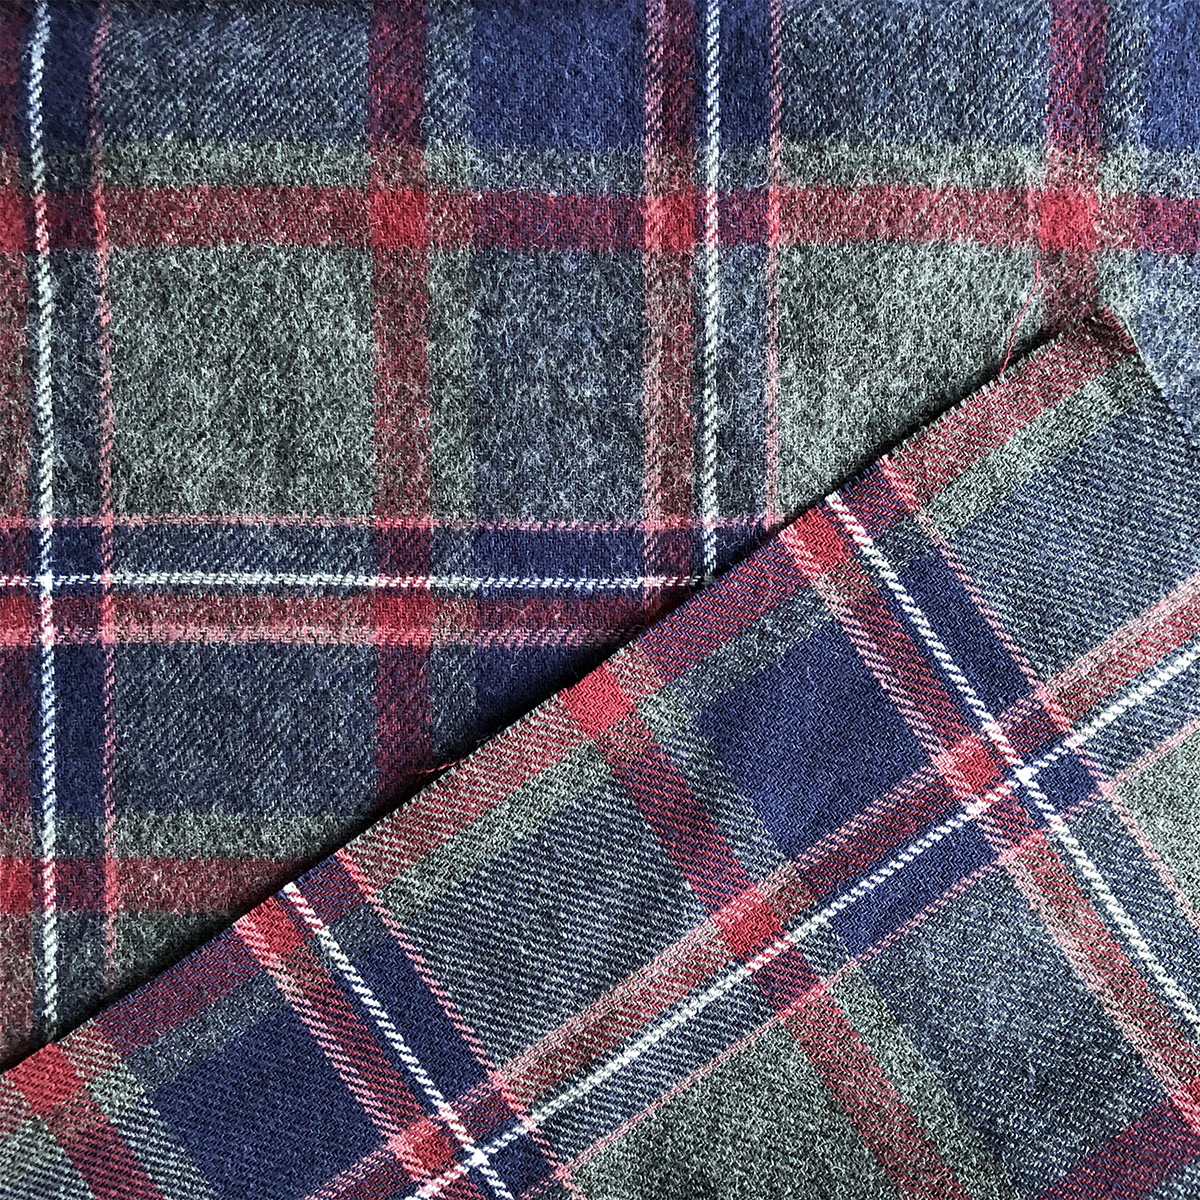 Cotton Flannel Fabric for men's casual shirts by melange yarn 100% cotton yarn dyed twill plaid brushed shirts woven fabric